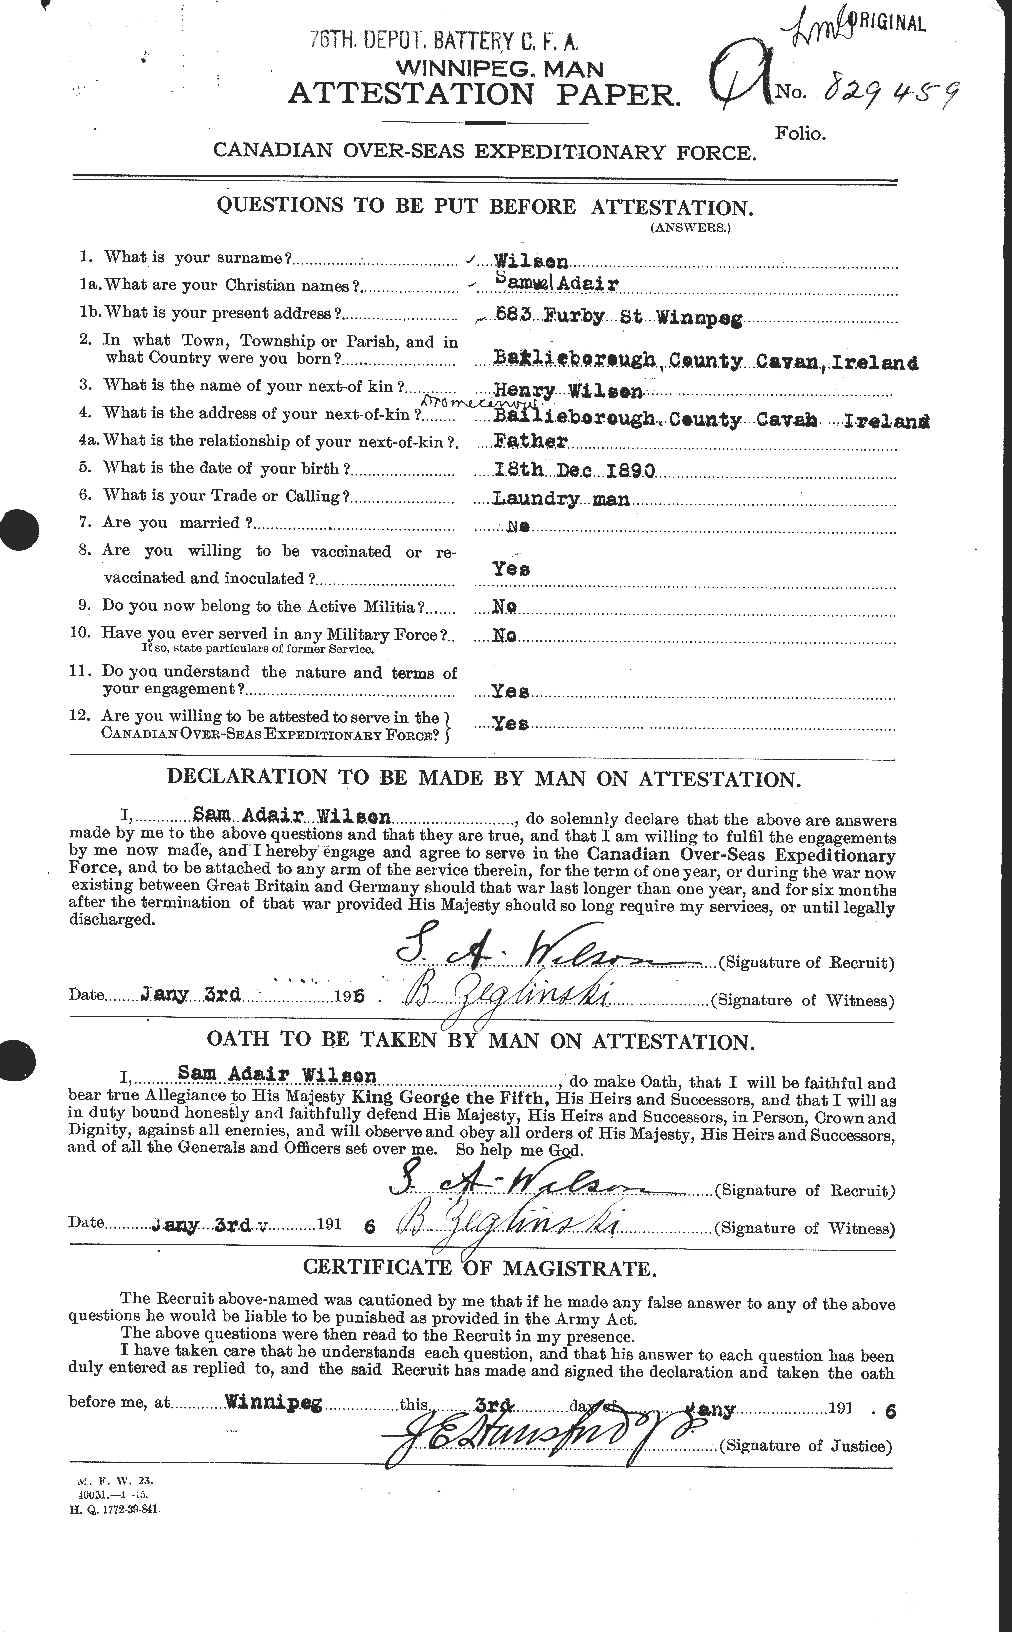 Personnel Records of the First World War - CEF 681109a